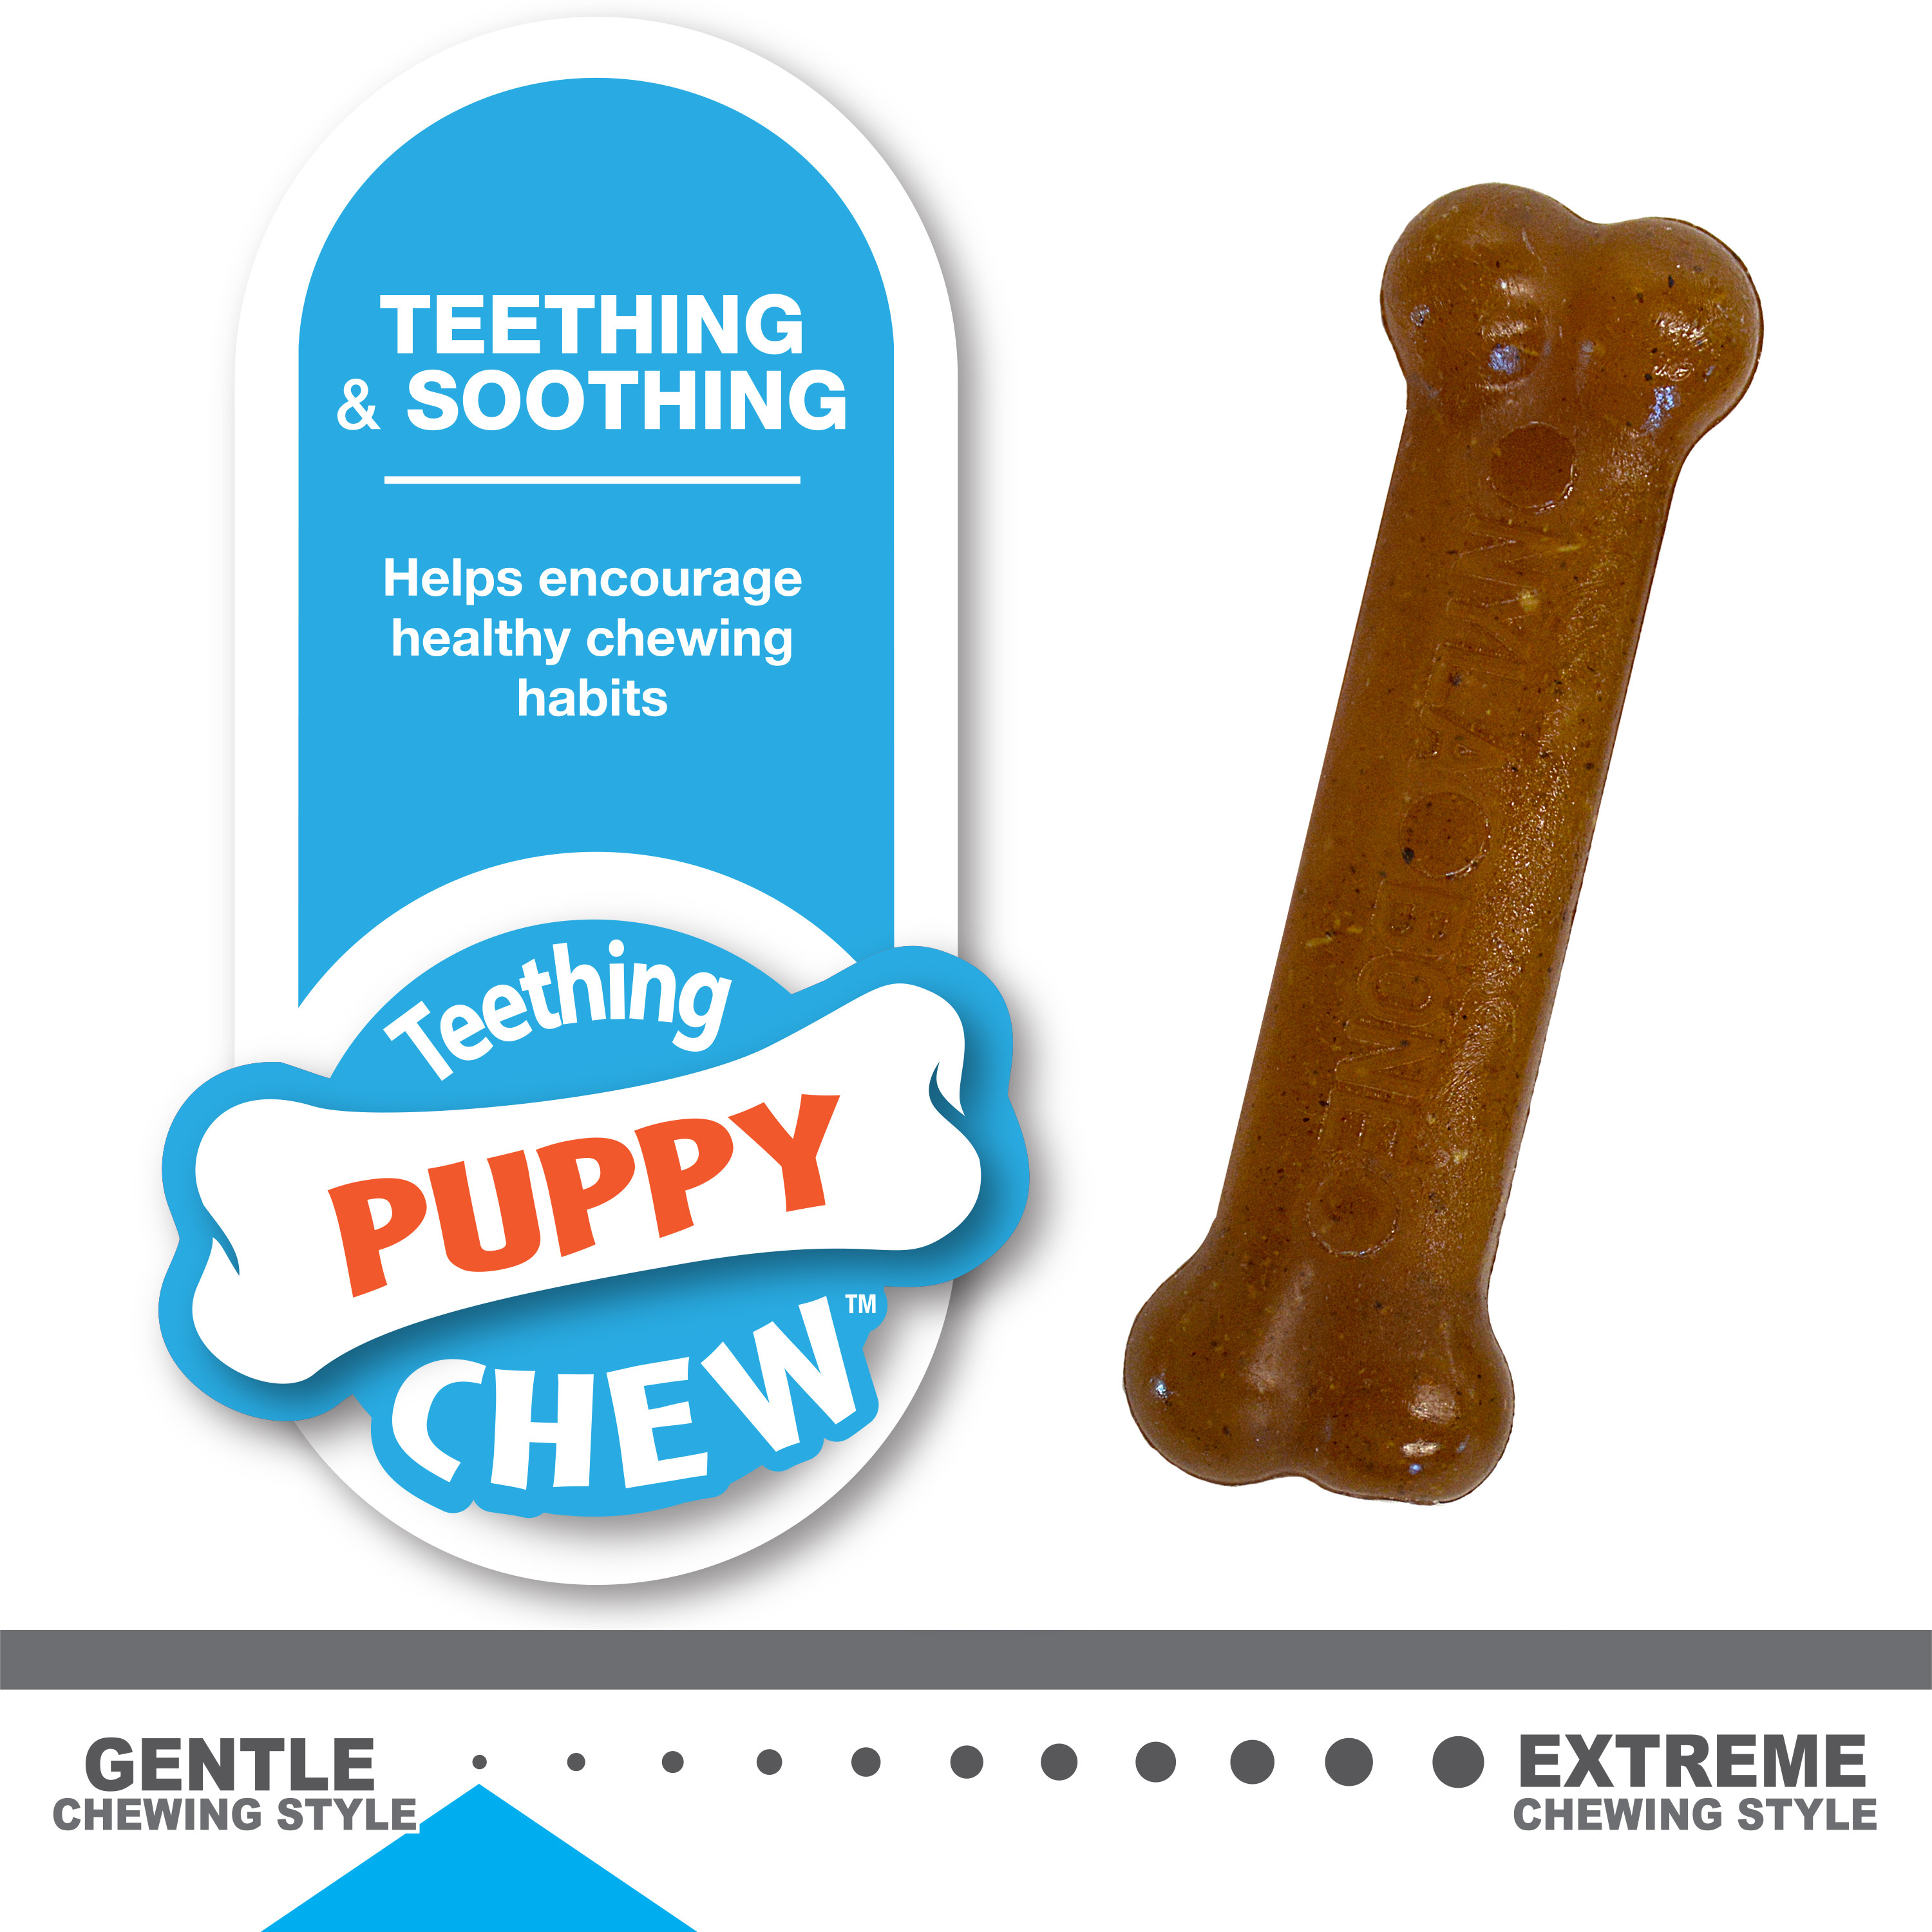 Nylabone Classic Puppy Chew Flavored Durable Dog Chew Toy Chicken & Peanut Butter Bone X-Small/Petite - Up to 15 lbs. (2 Count) - image 10 of 11